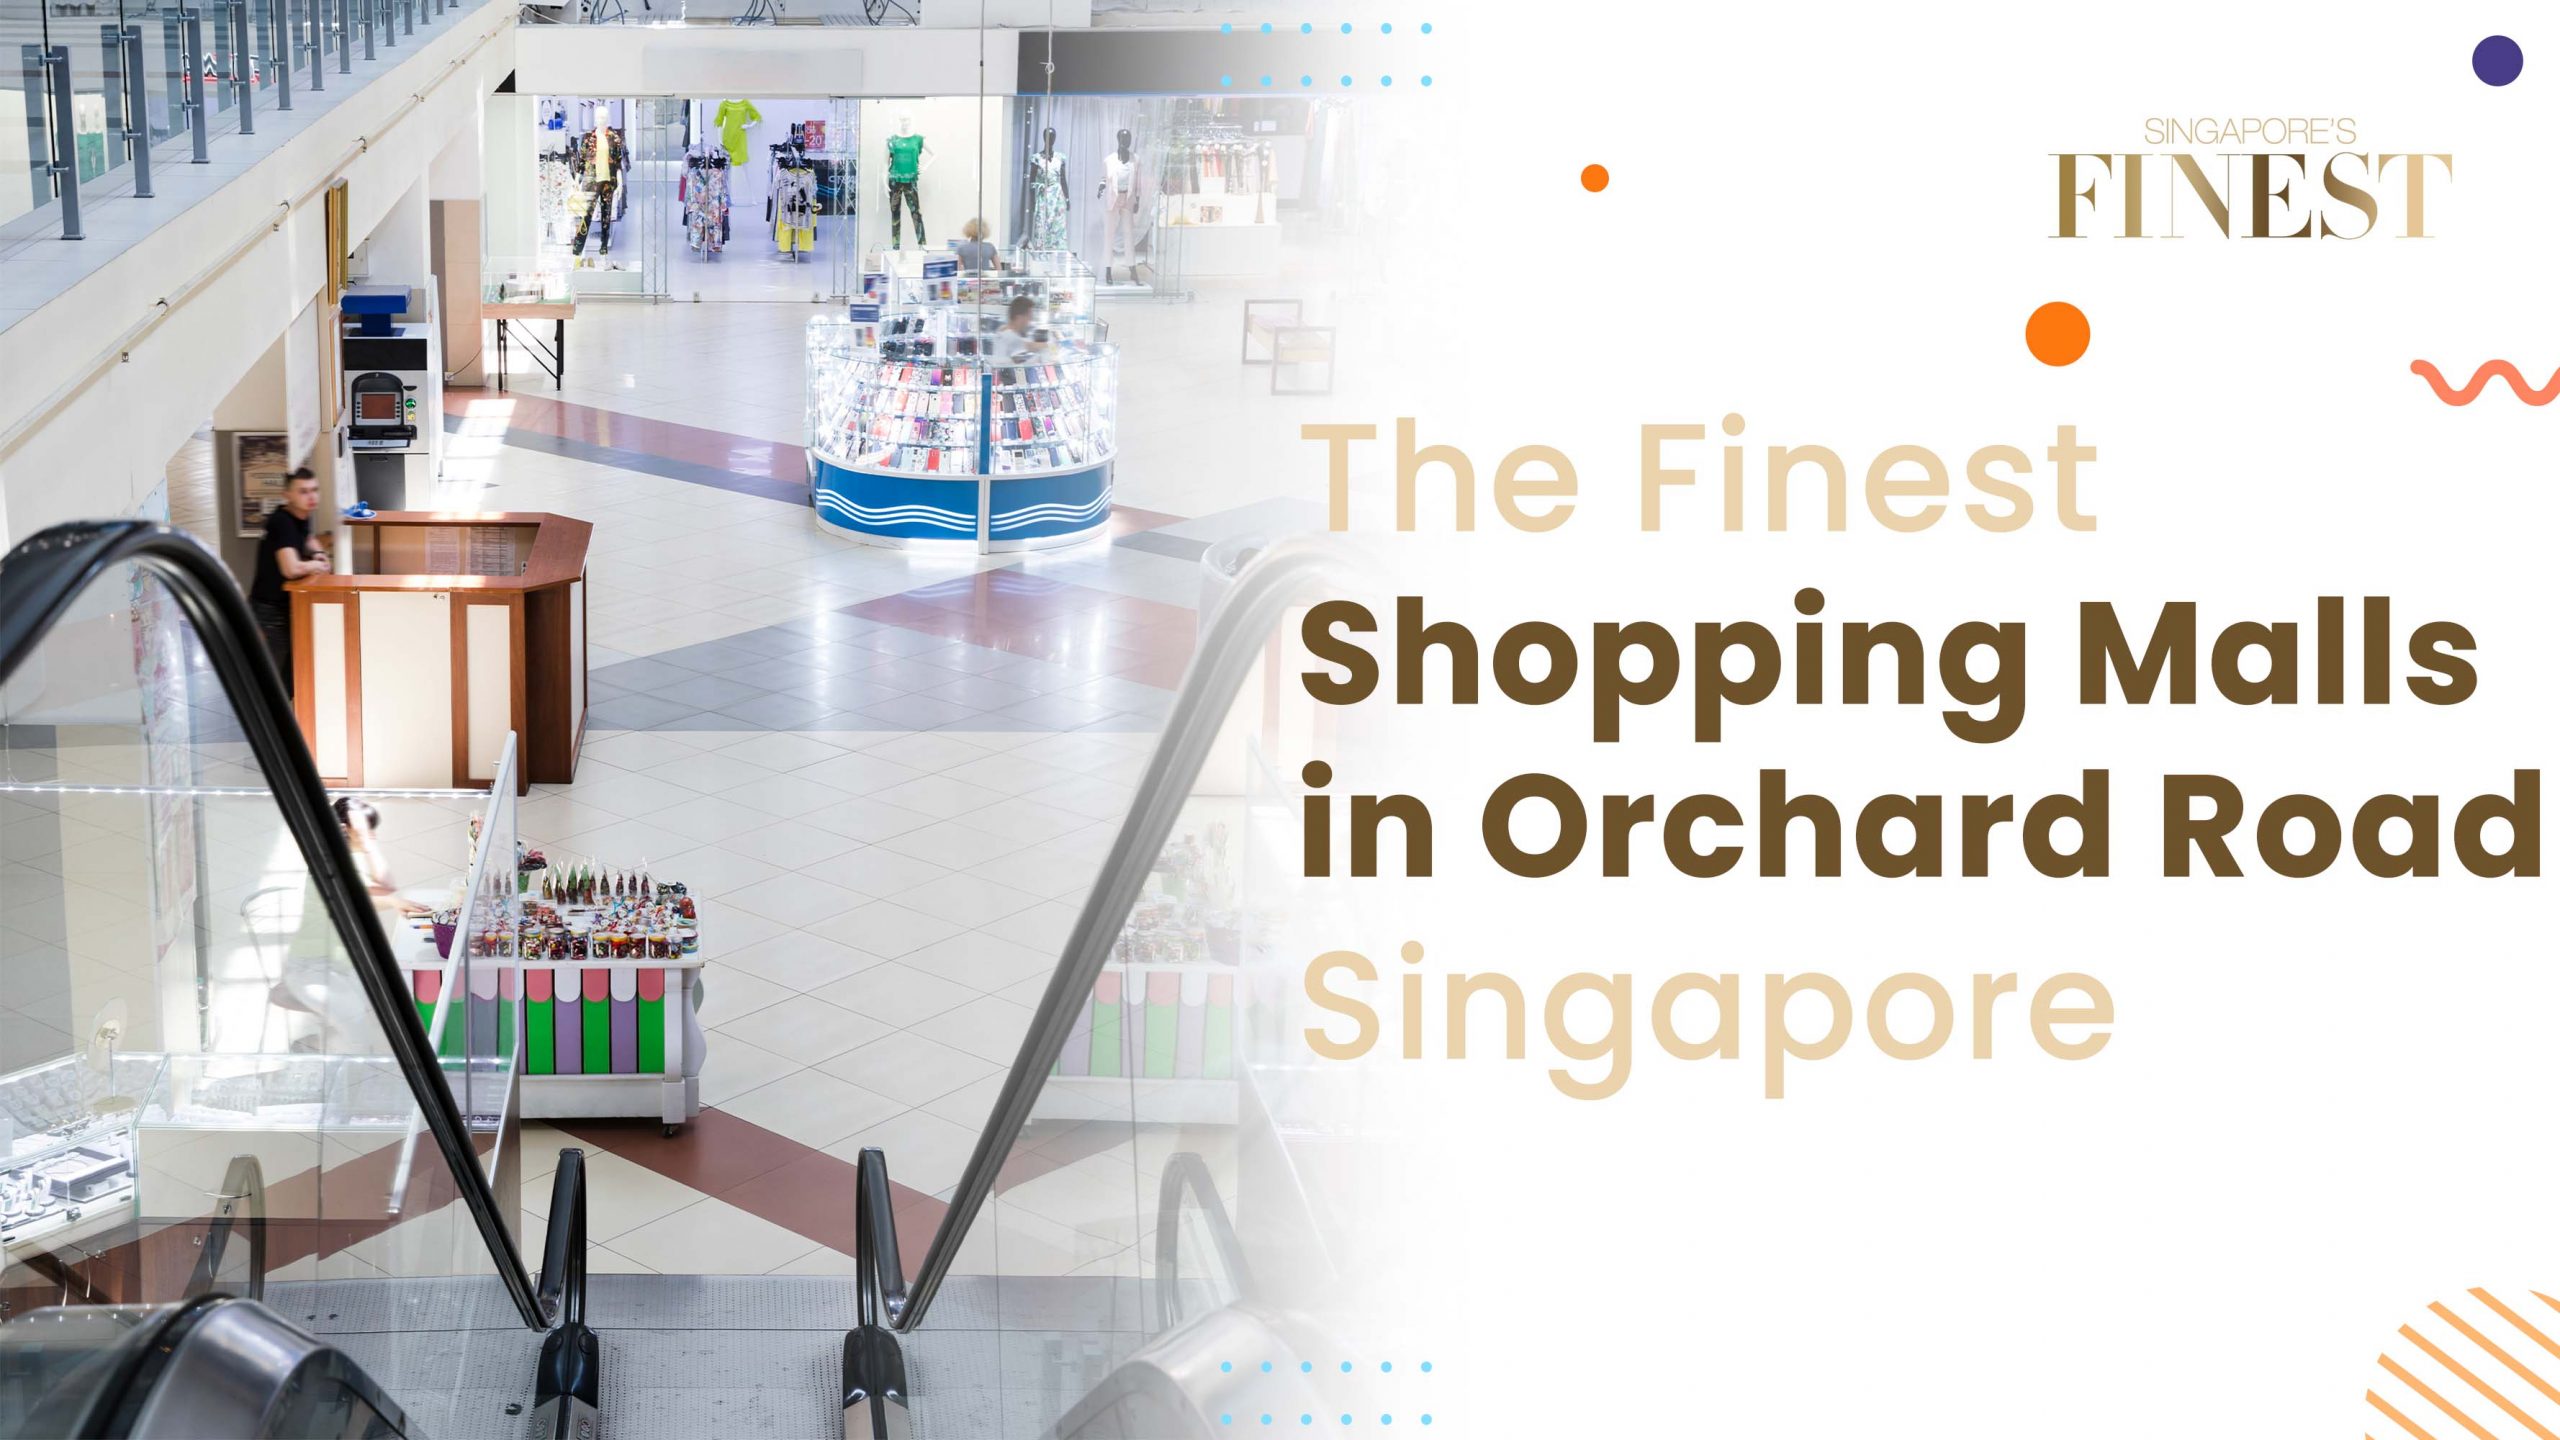 Finest Shopping Malls in Orchard Road